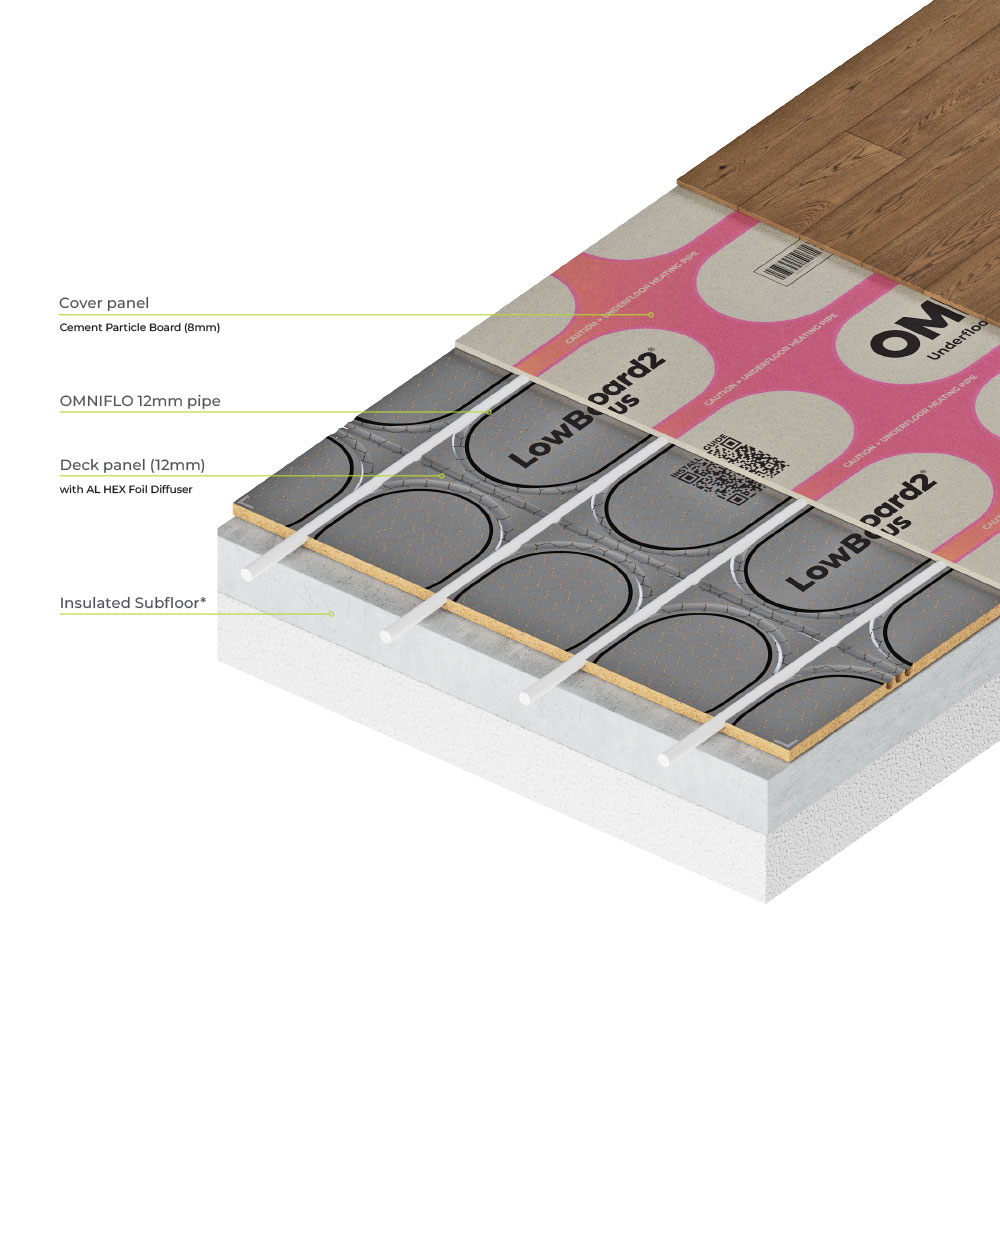 LowBoard 2® Plus – for Low Build Up floors